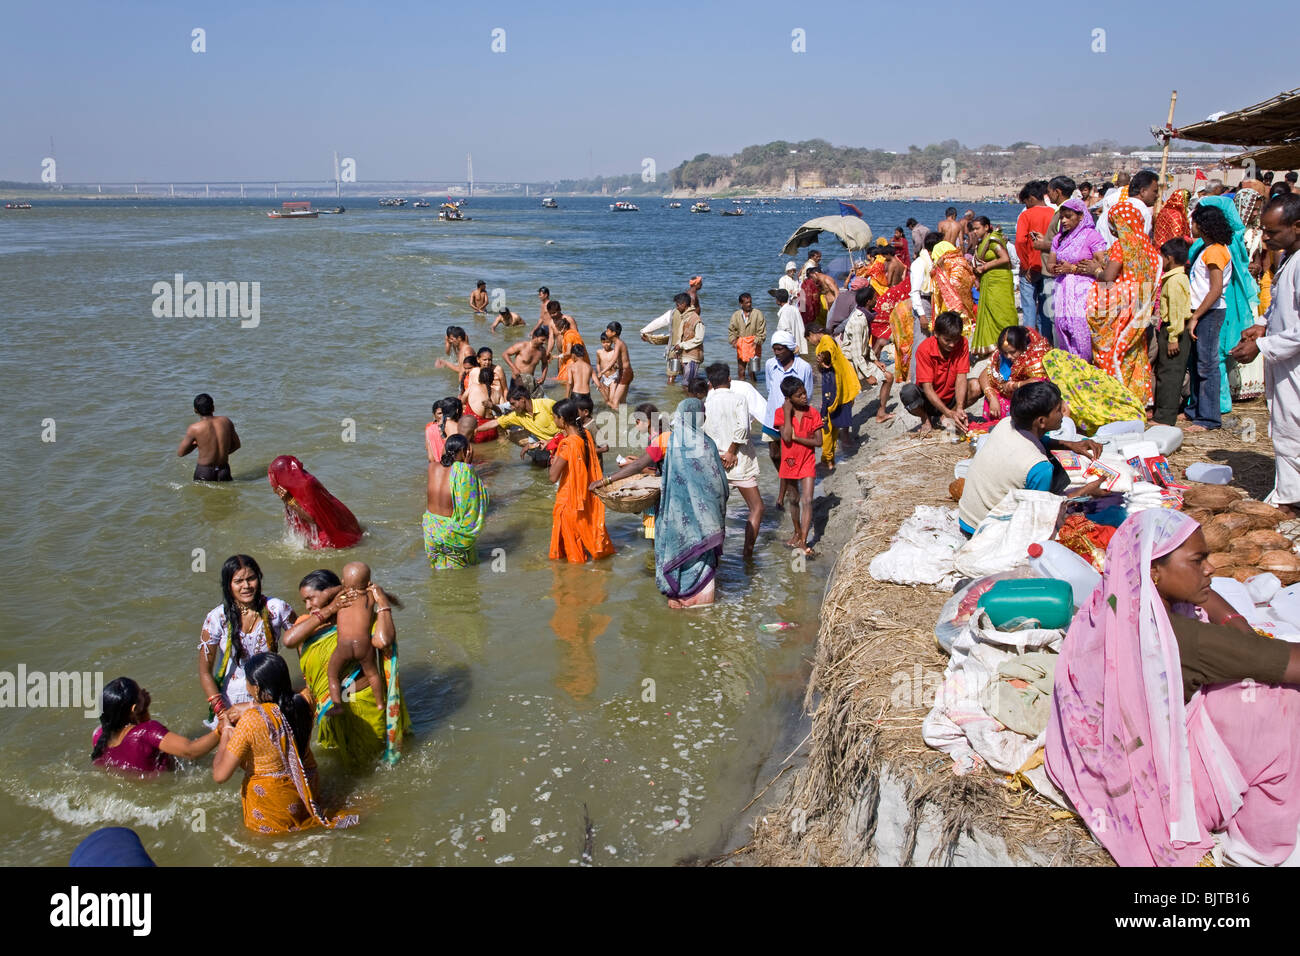 Pilgrims bathing in the sacred Ganges river. Sangam (the confluence of Ganges and Yamuna rivers). Allahabad. India Stock Photo